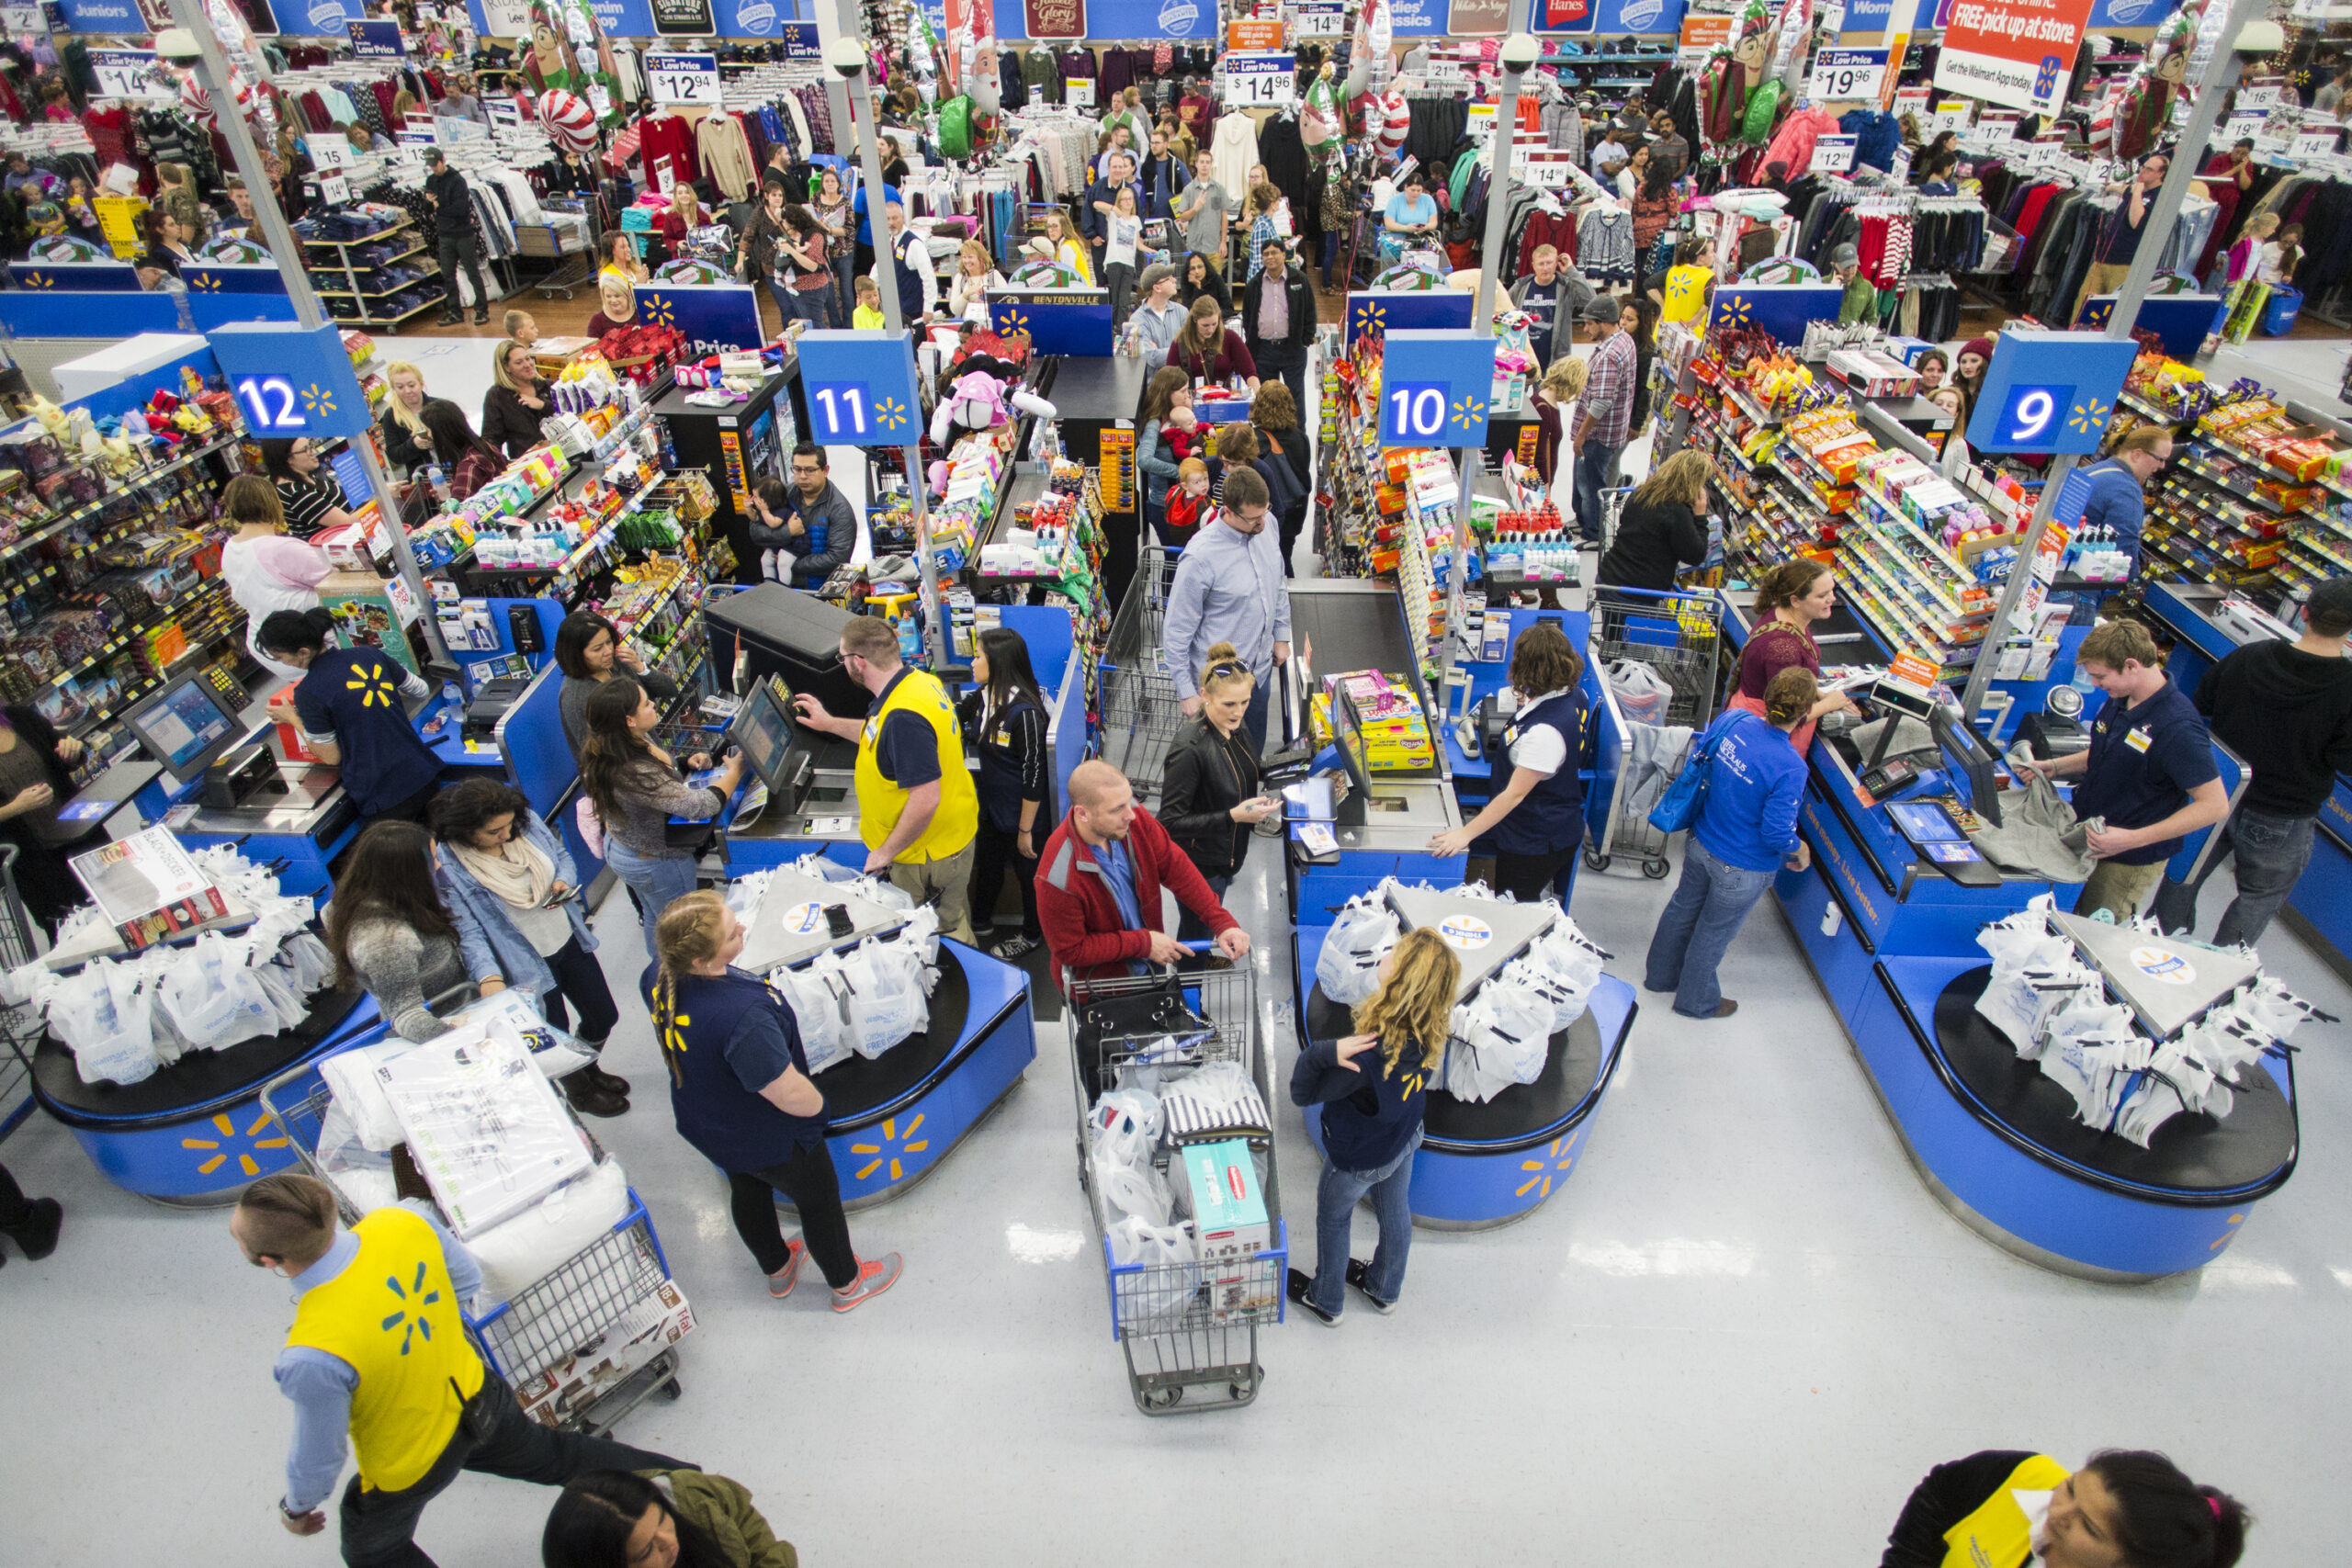 Wisconsinites Head To Shopping Centers For Black Friday